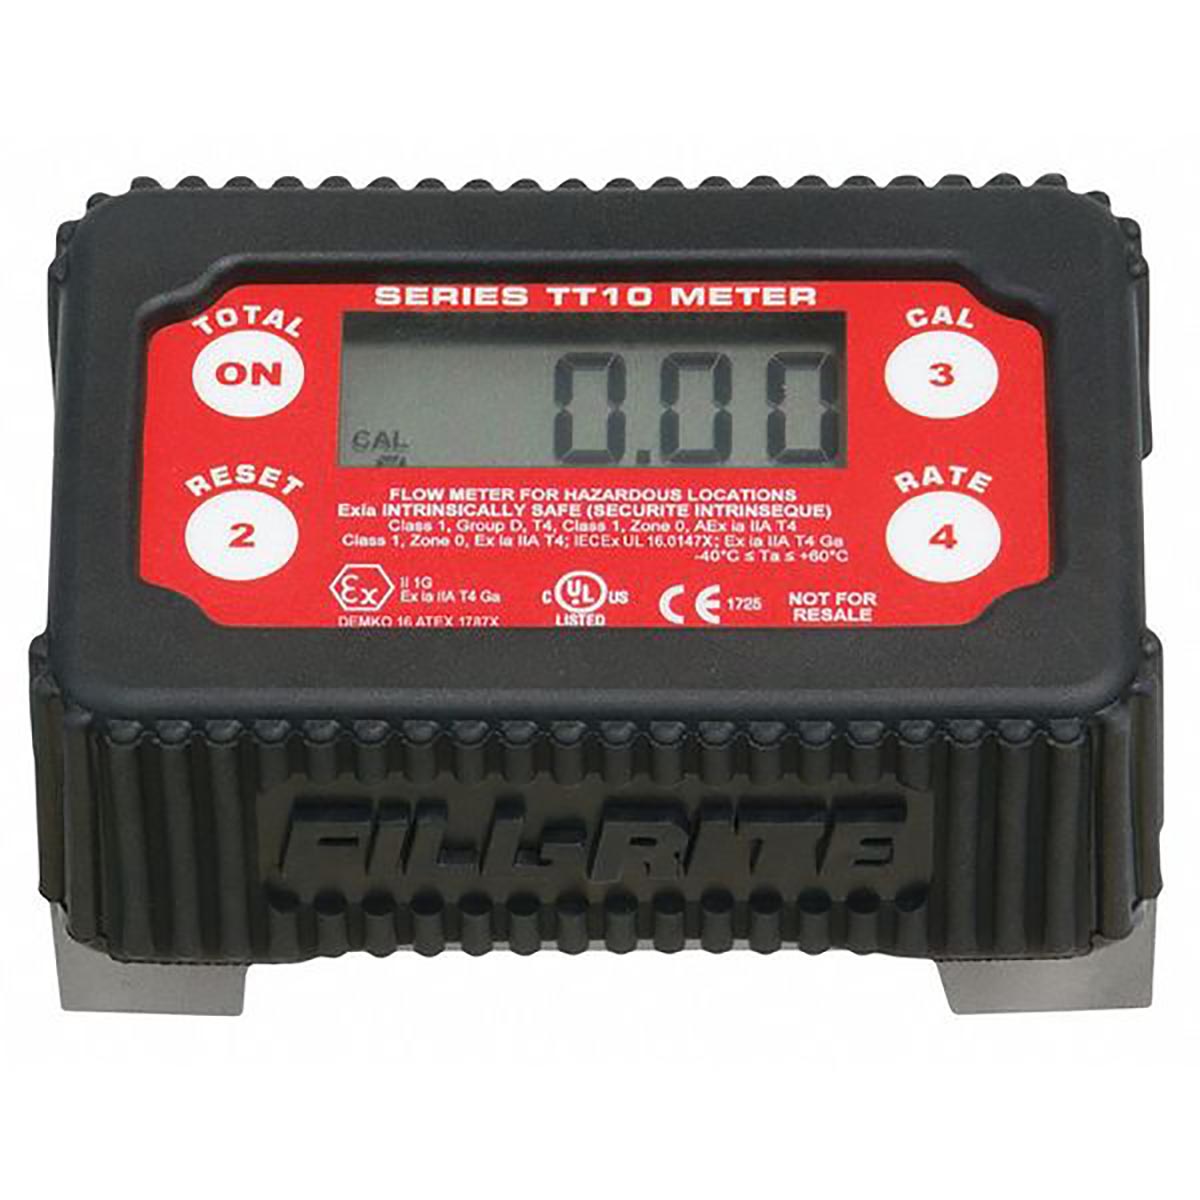 METER, 1" IN-LINE ELECTRONIC, 2-35GPM